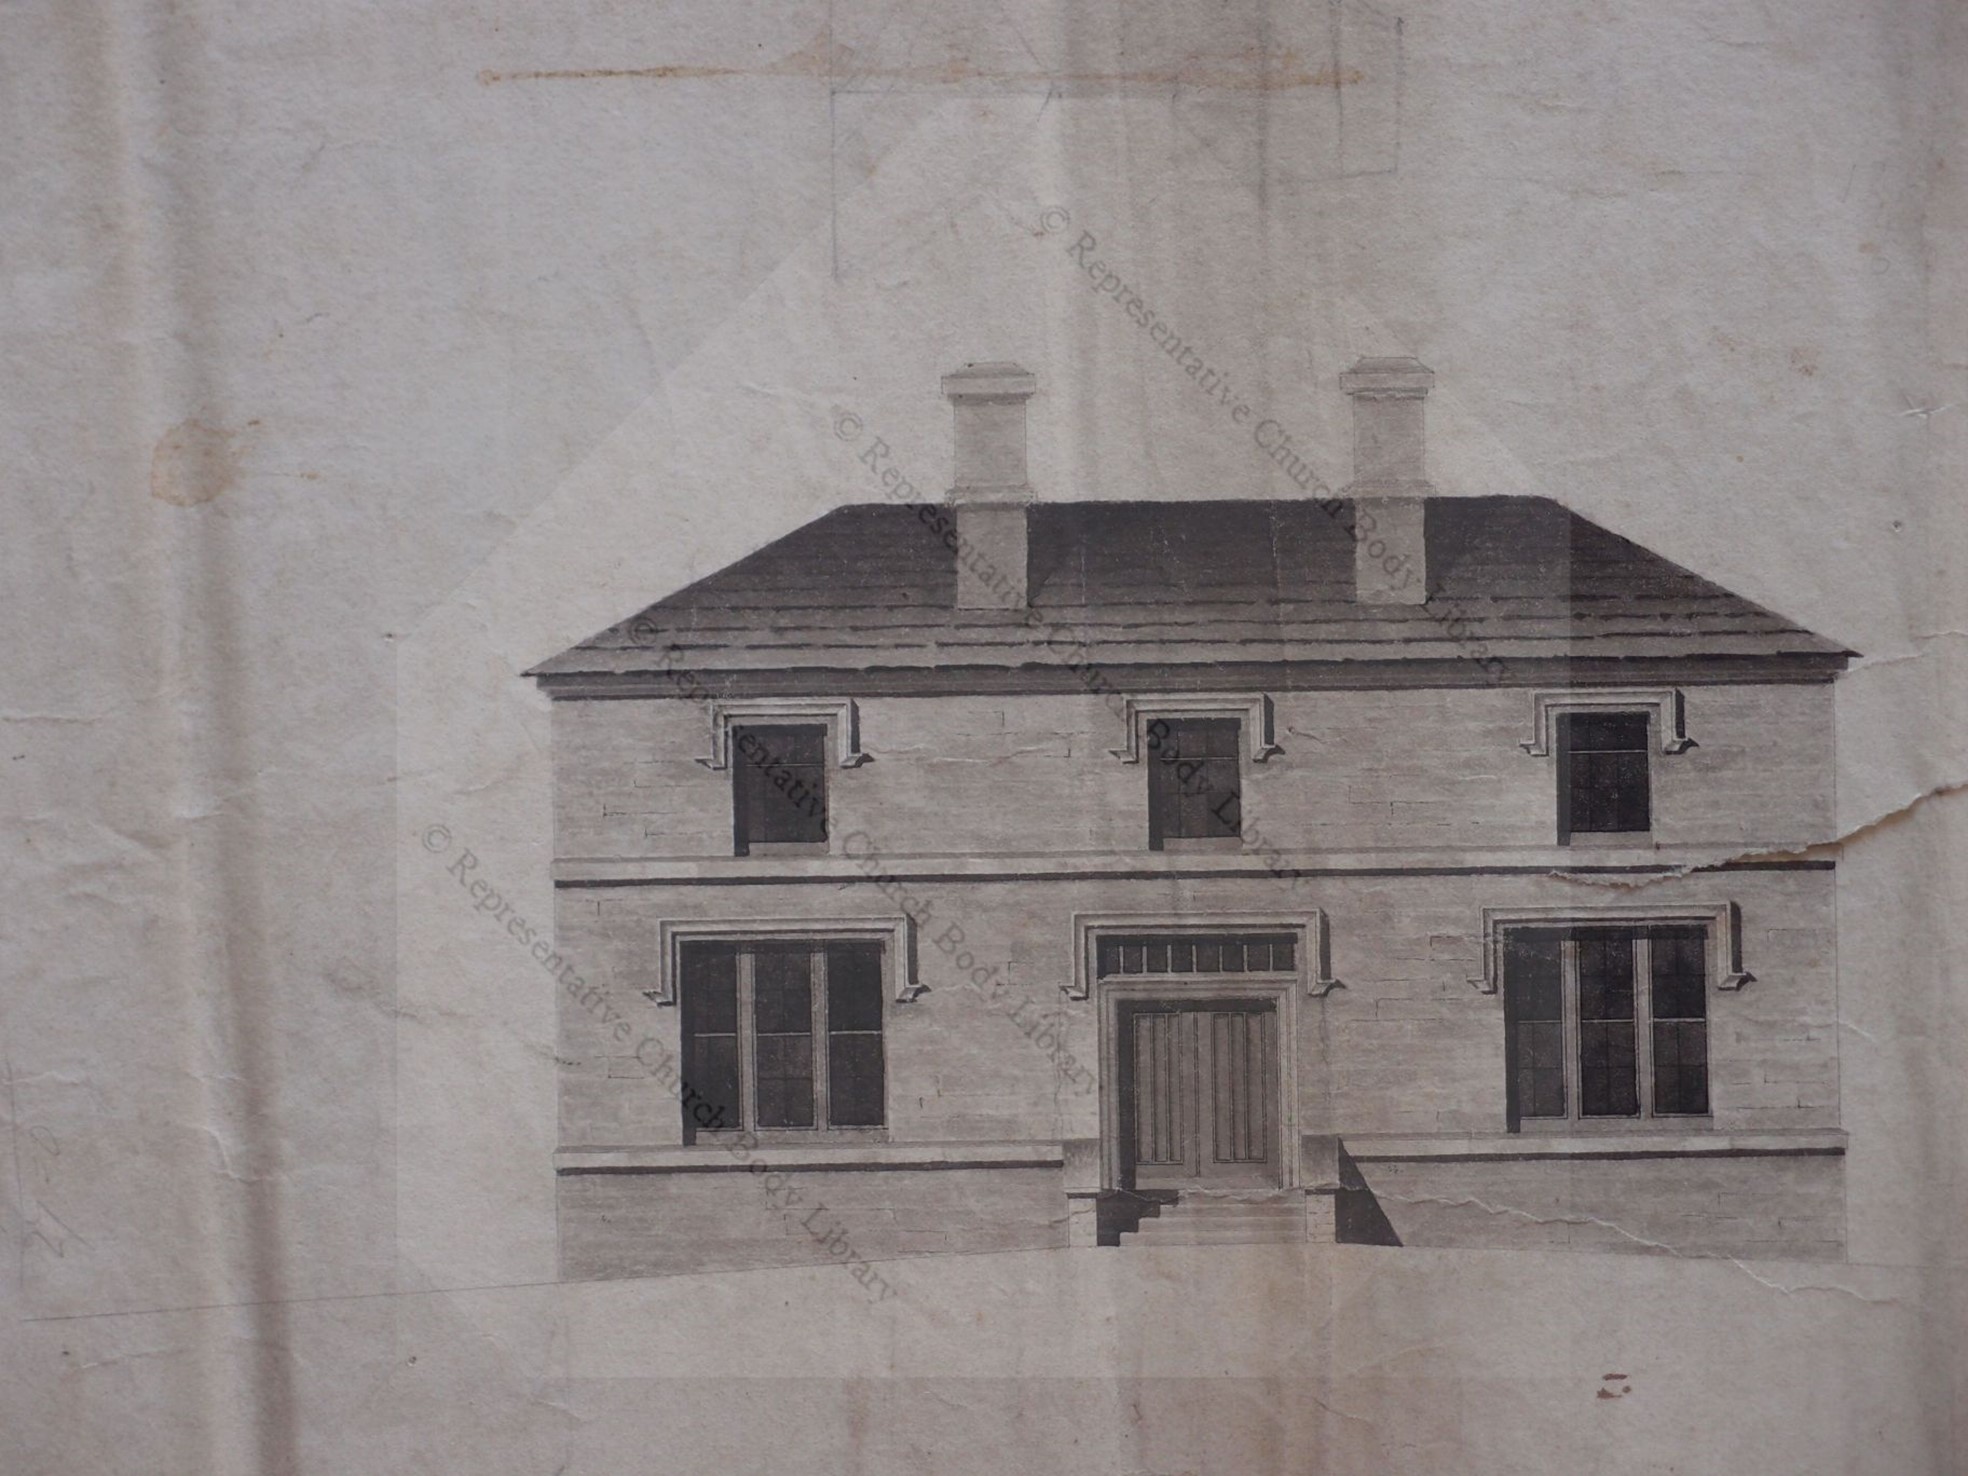 Unsigned, “Finglas Glebe House. Diocese of Dublin. Front Elevation ,” RCB Library - Architectural Drawings, accessed April 4, 2023, https://archdrawing.ireland.anglican.org/items/show/4605.